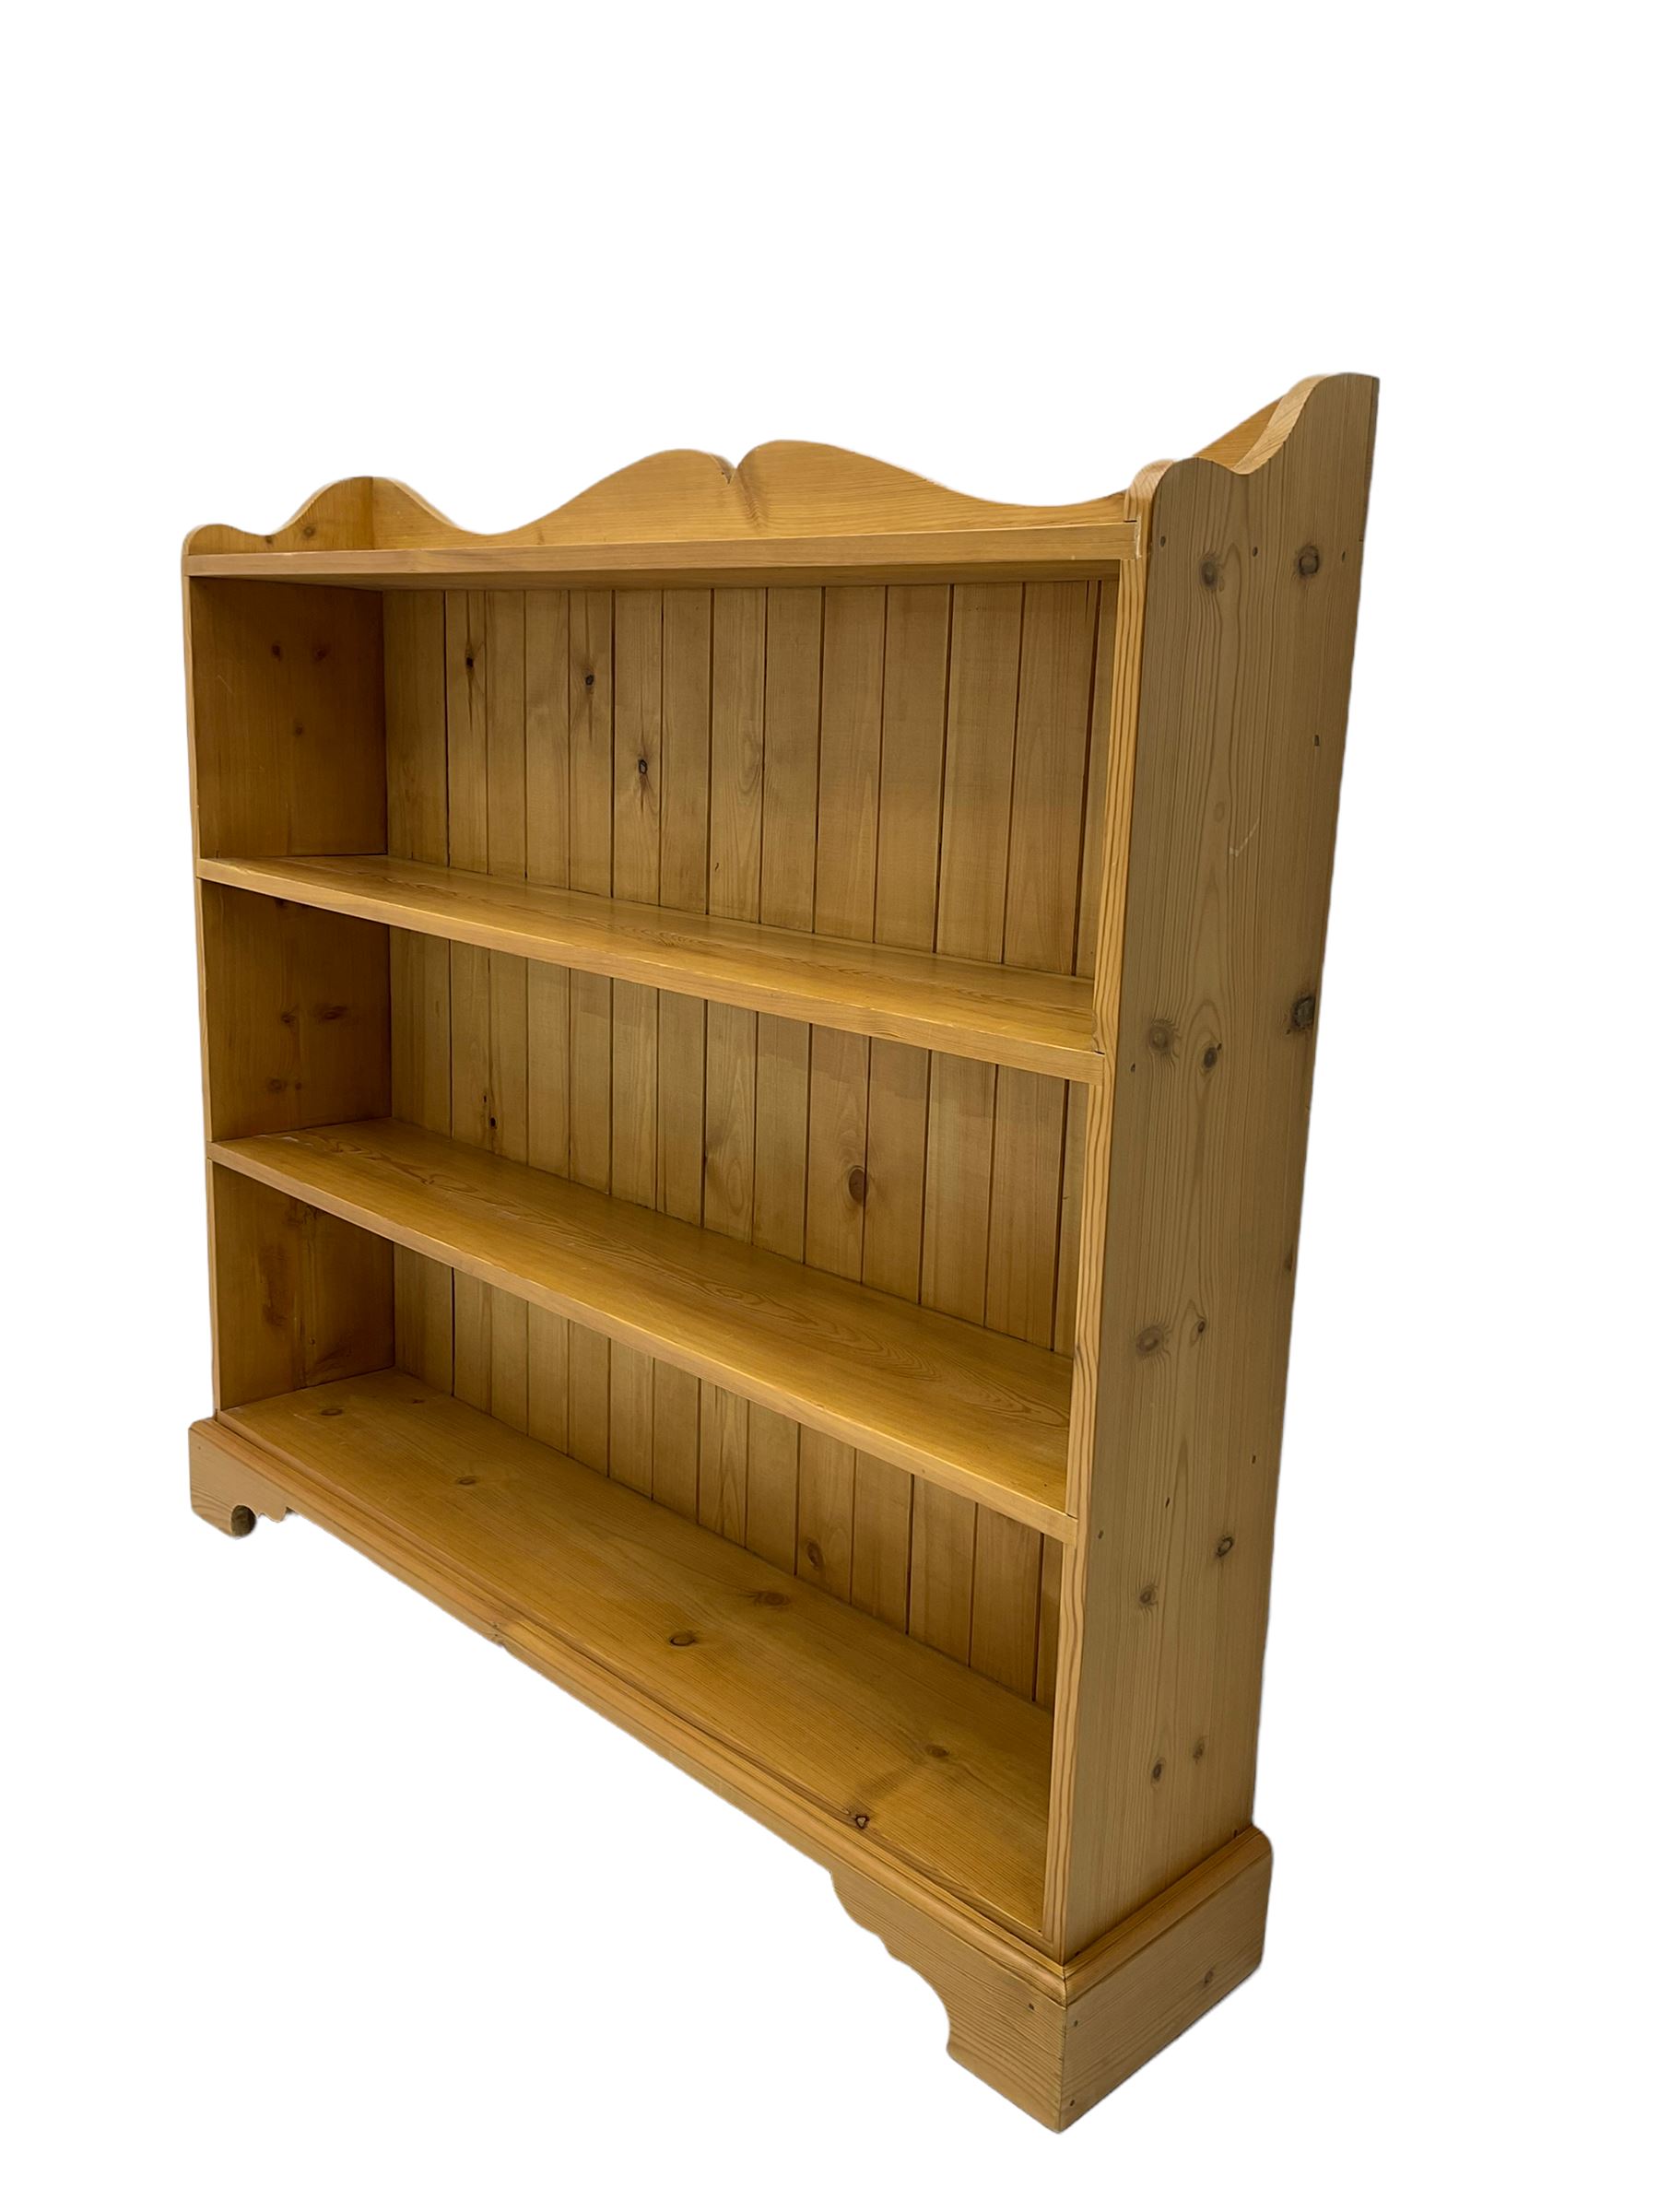 Waxed pine bookcase - Image 3 of 6